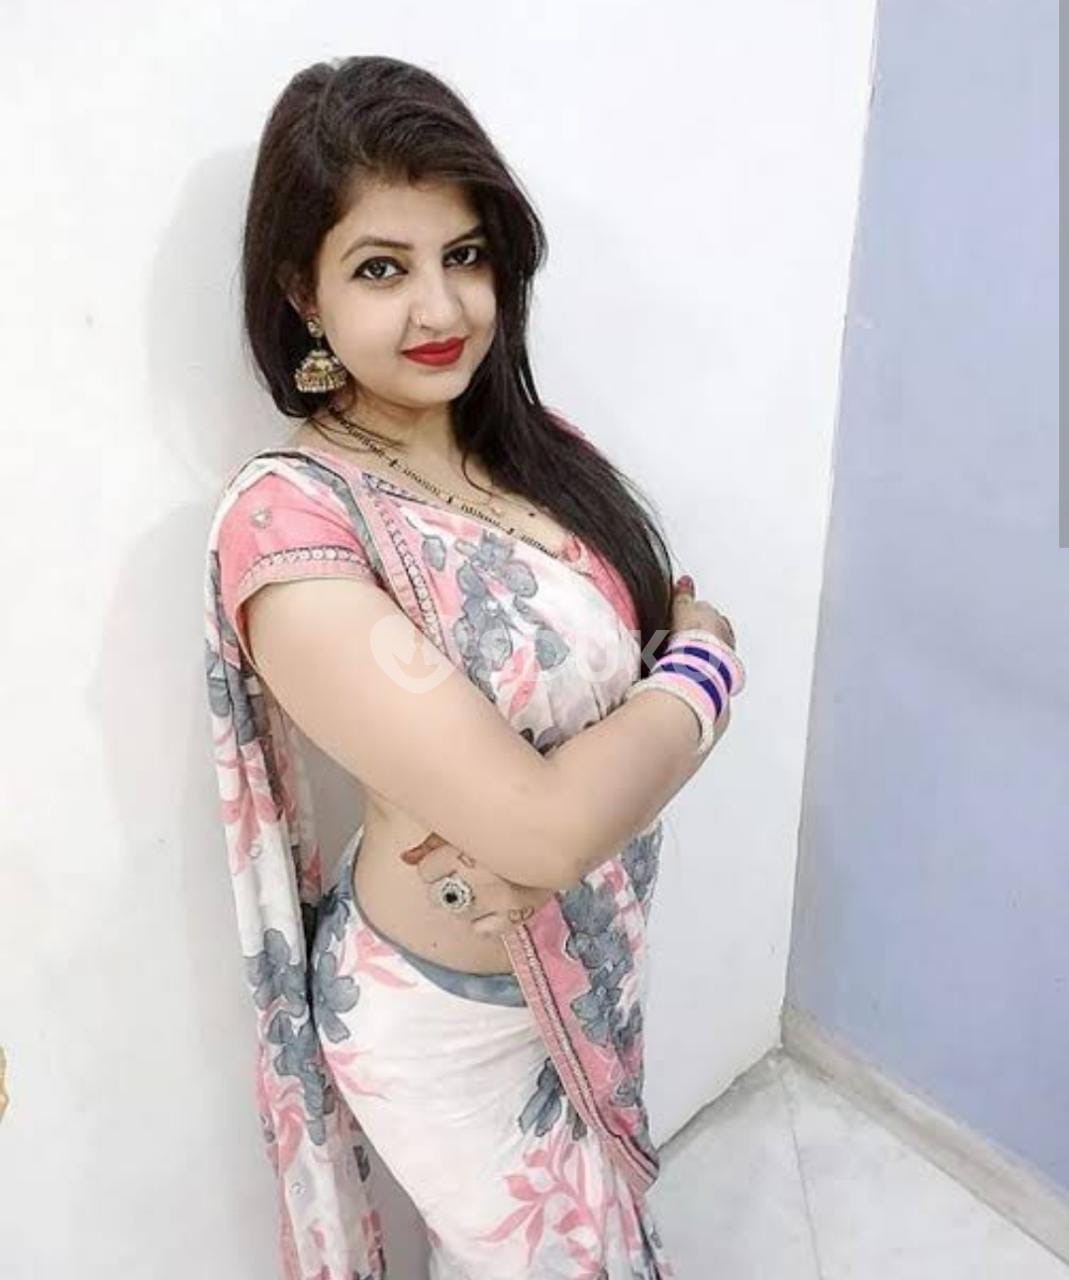 ❣️ katraj ❣️✅🔥▄BEST ESCORT TODAY LOW PRICE SAFE AND SECURE GENUINE CALL GIRL AFFORDABLE PRICE CALL NOW�